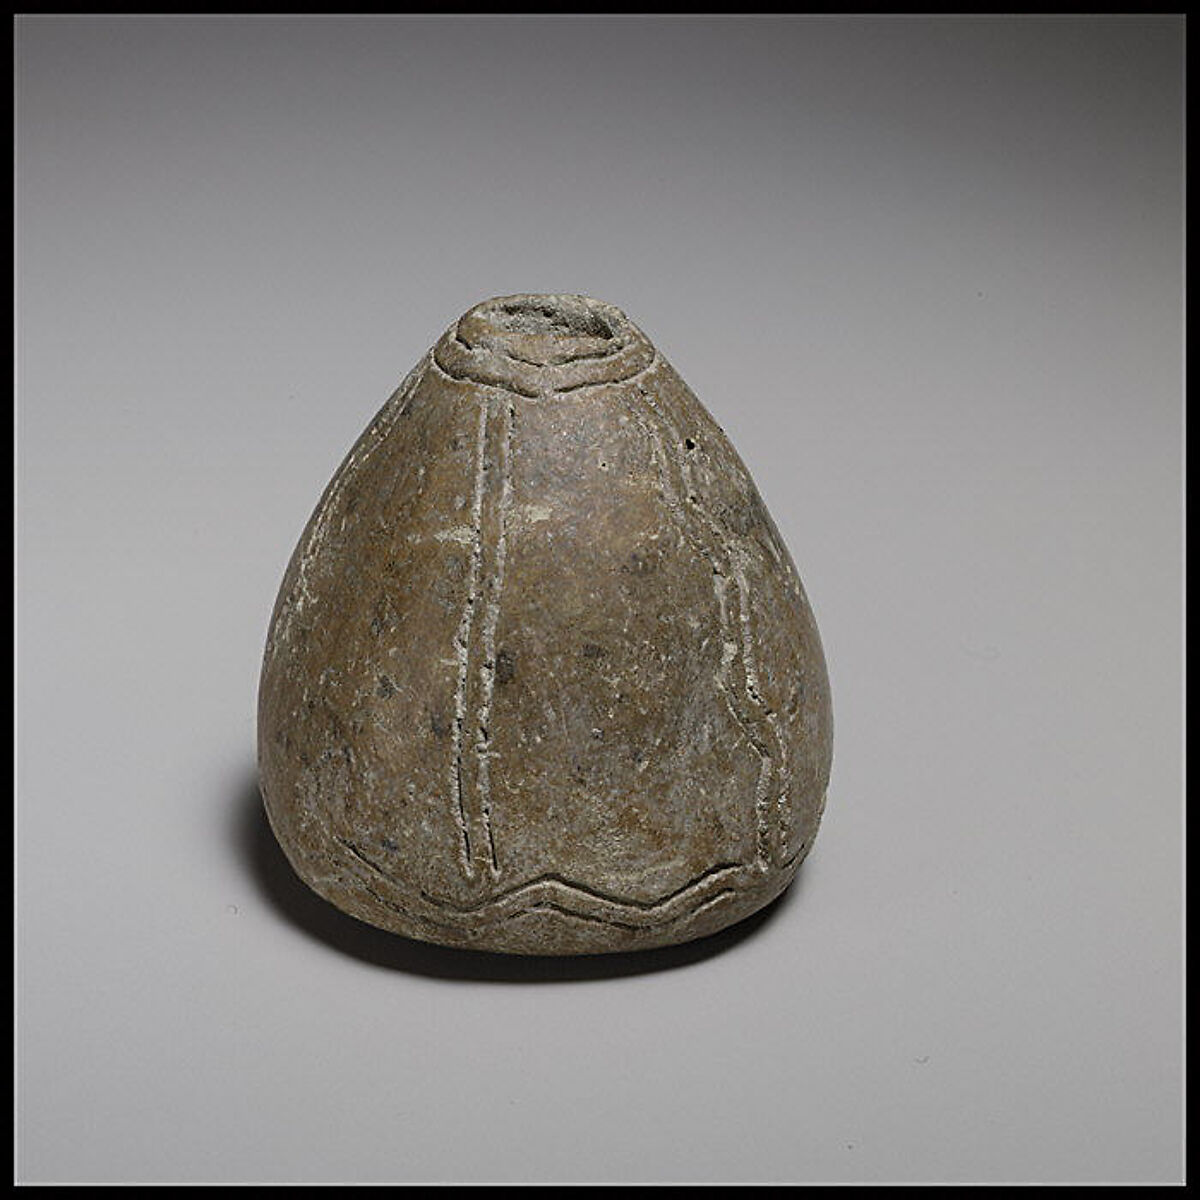 Terracotta conical-hemispherical spindle-whorl with slightly rounded base, Terracotta, Cypriot 